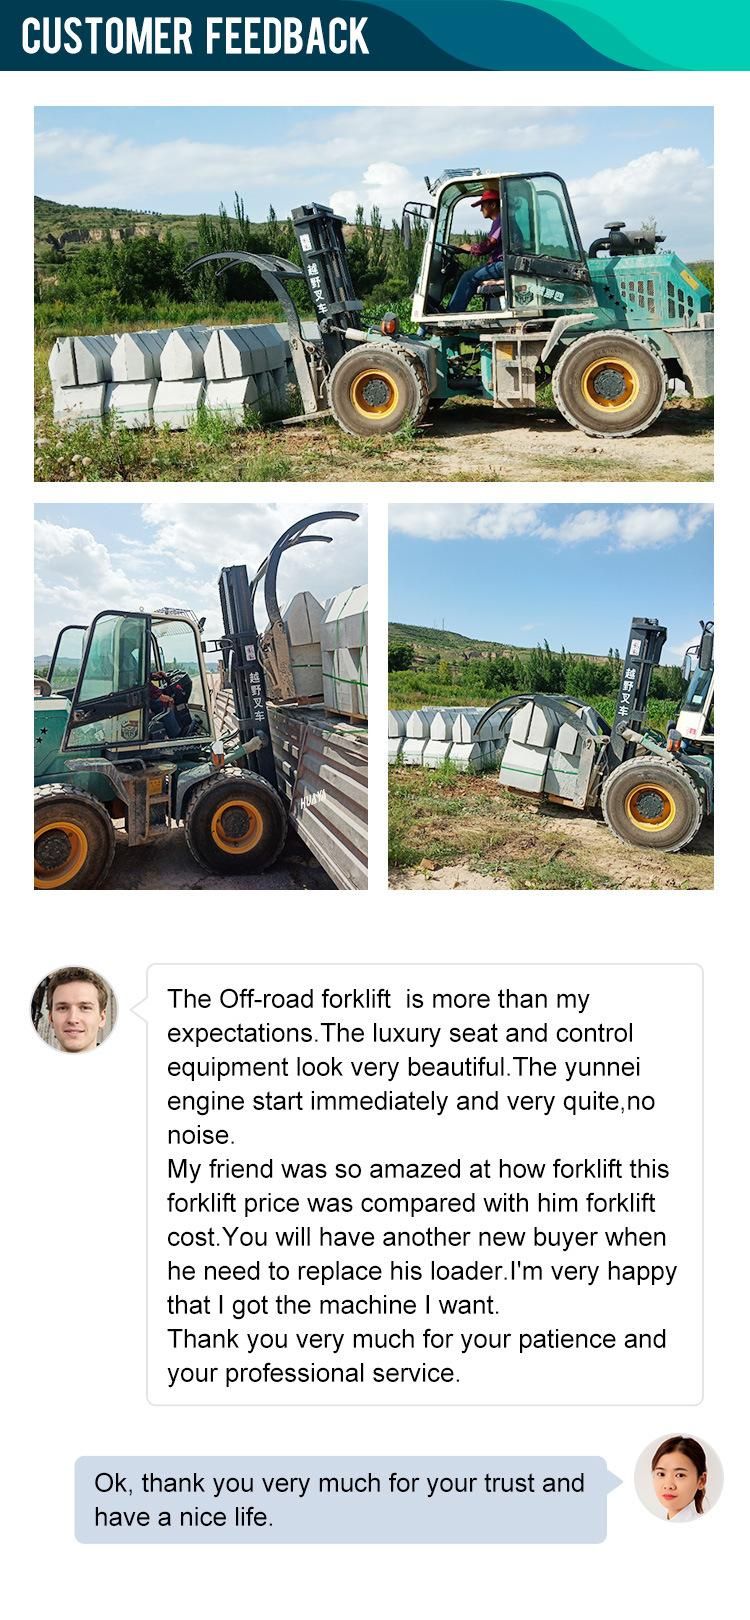 Multifunction Diesel off Road Forklift Truck Machines All Rough Terrain Forklift China EPA Industrial Transmision Four Wheel Small Diesel Mini Forklifts Forsale